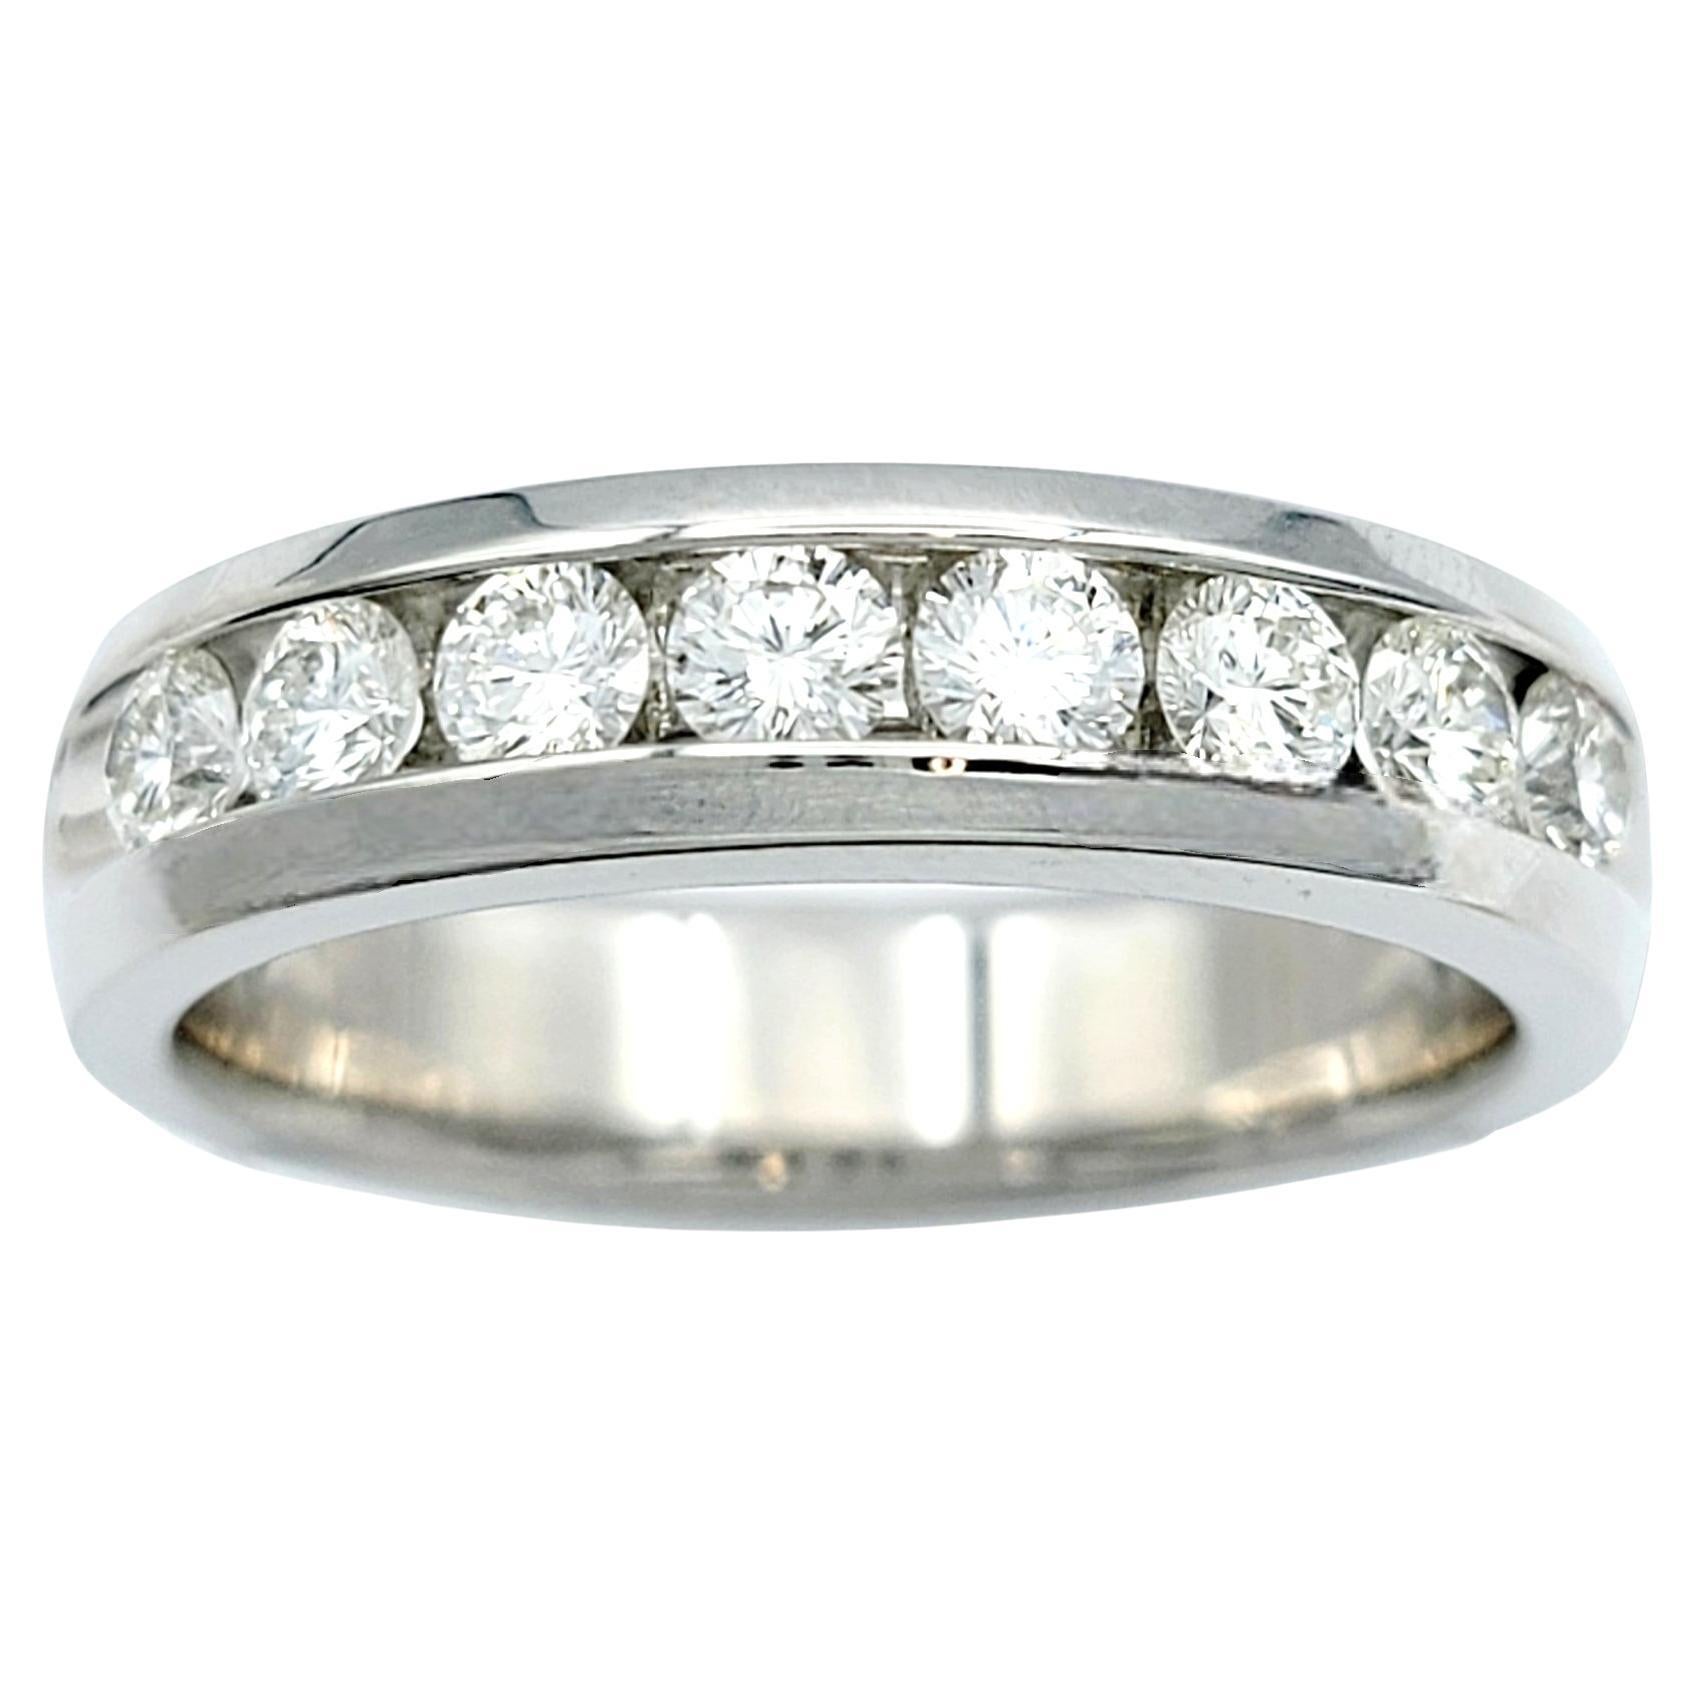 Ring Size: 10.25

This 'The Leo Diamond' band ring is a chic and elegant work of art. This diamond piece has a simple design, making it a sophisticated accessory suitable for both men and women. The band features a string of channel-set round